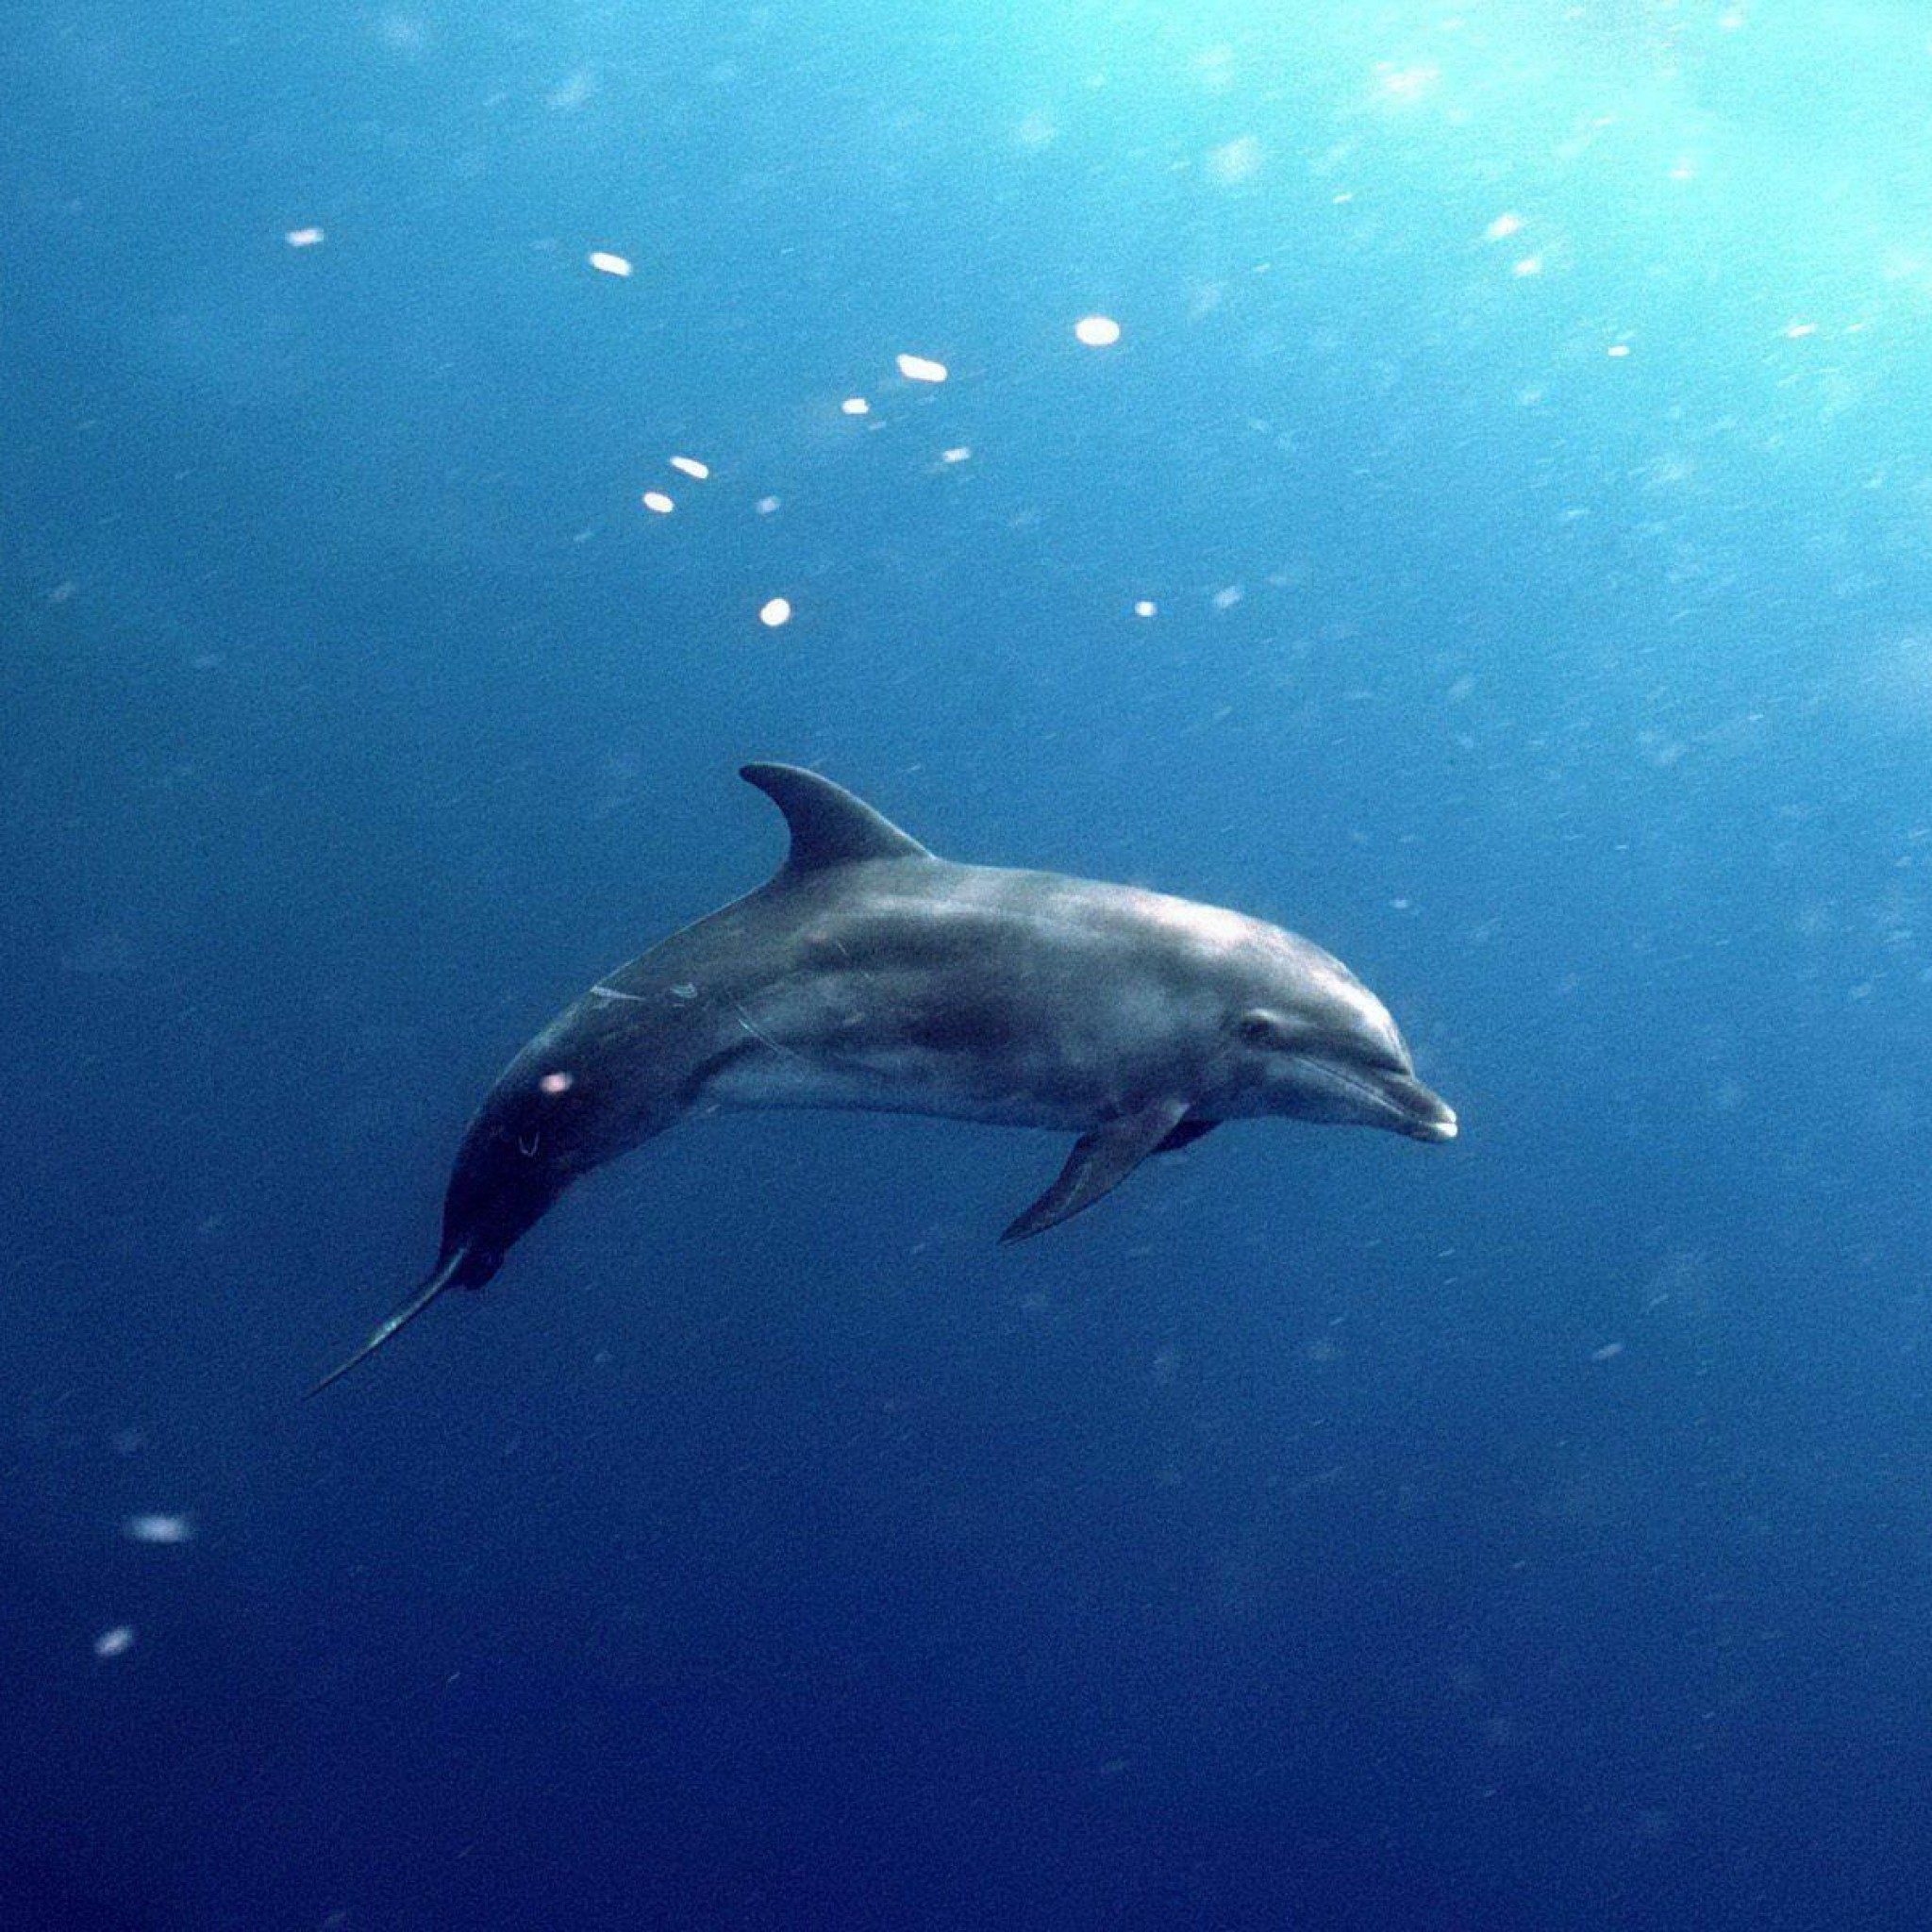 2048x2048 Pink dolphin wallpaper iphone - photo#26